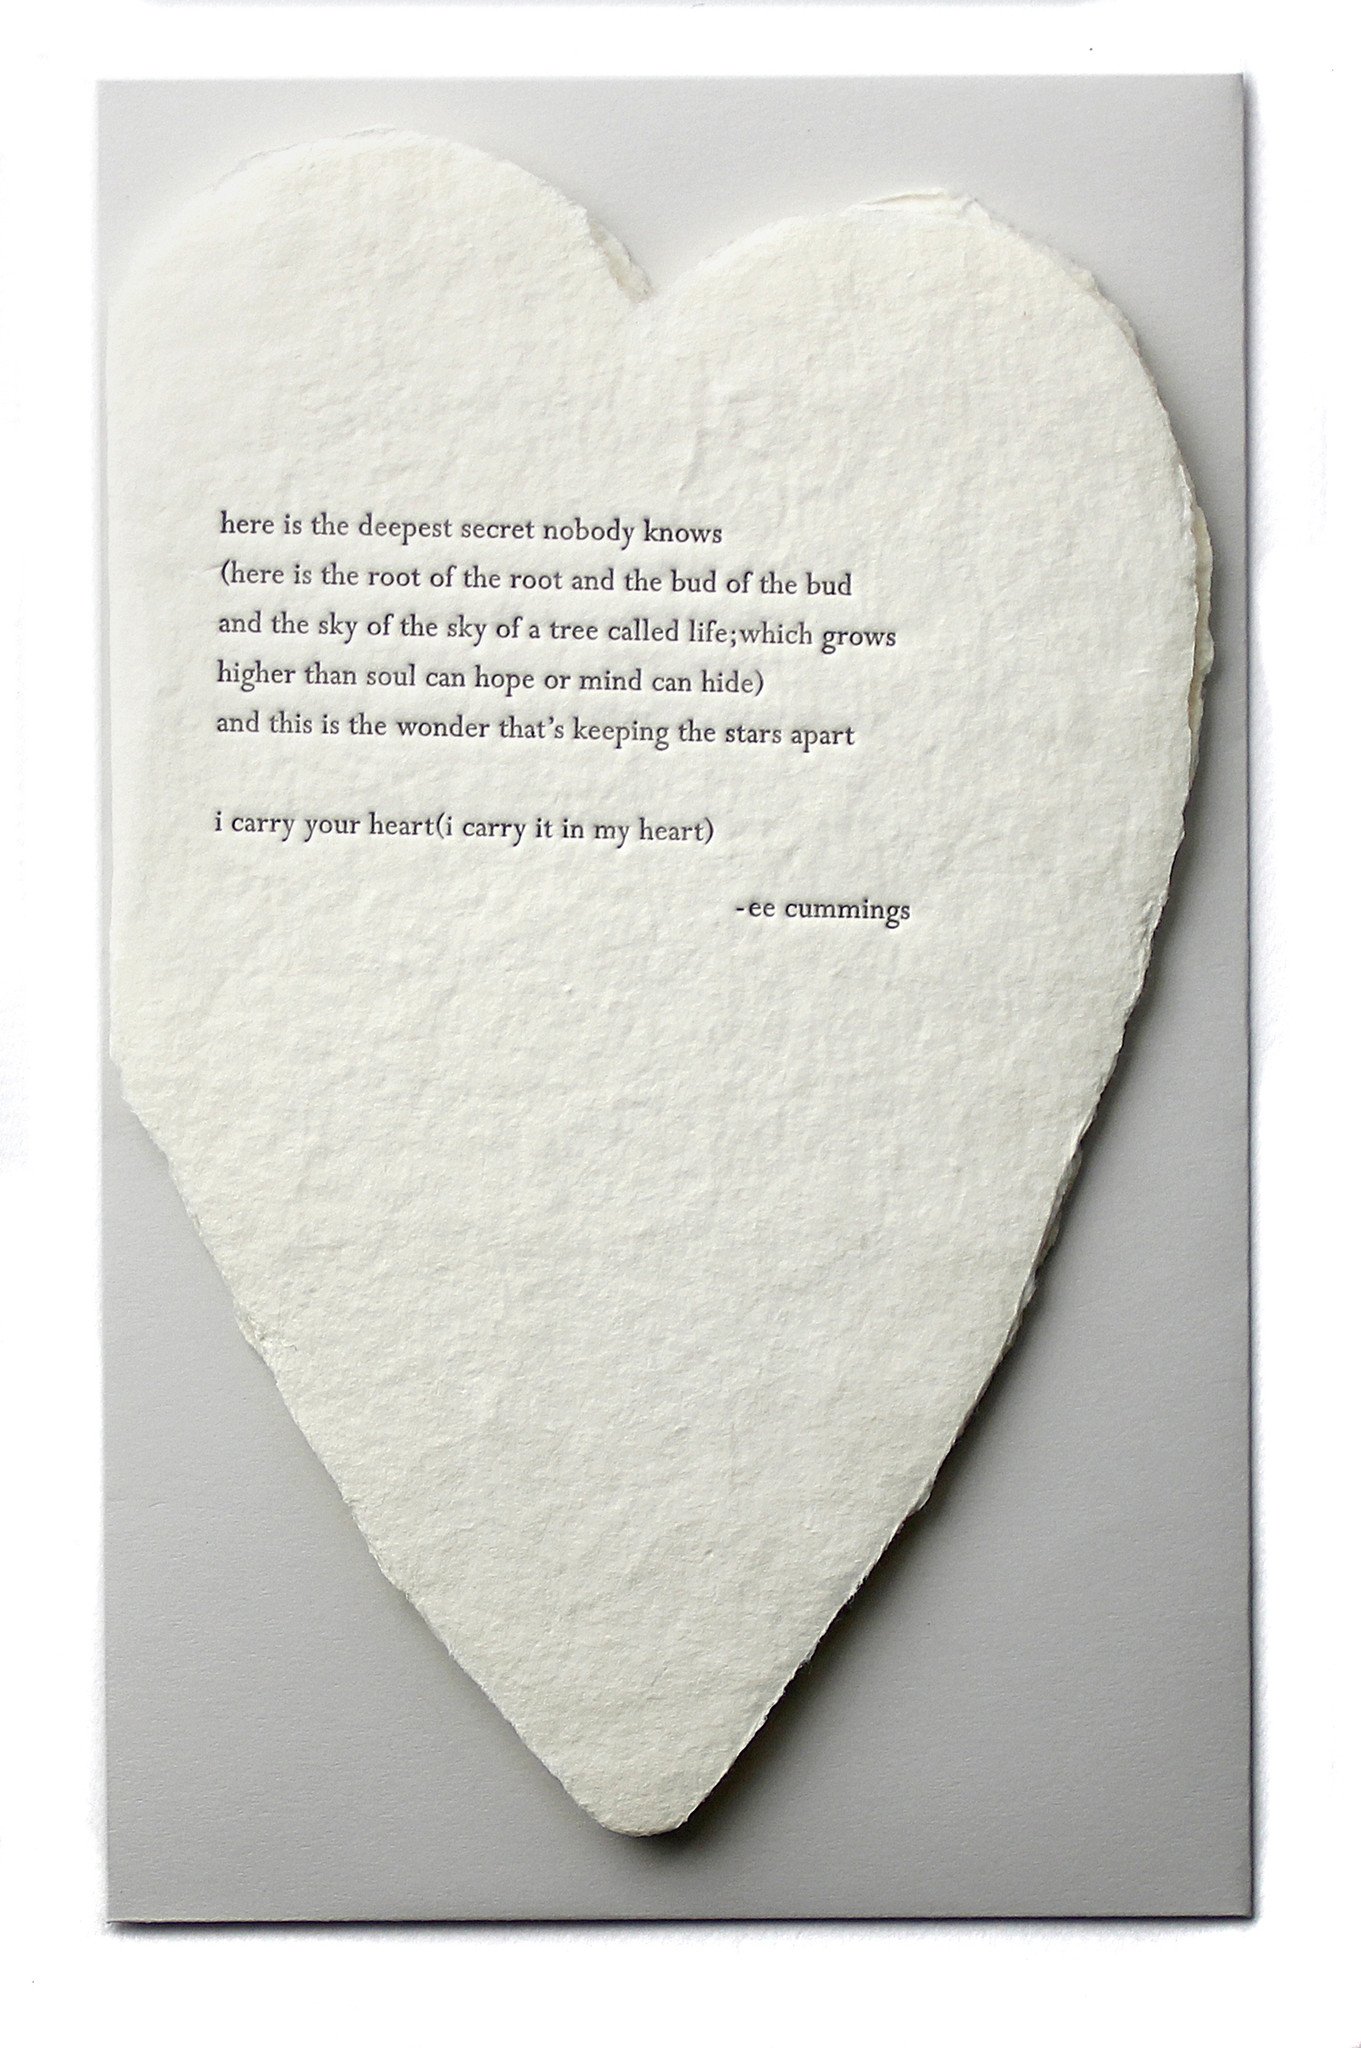 deckled paper heart with quote from ee cummings embossed $8.00